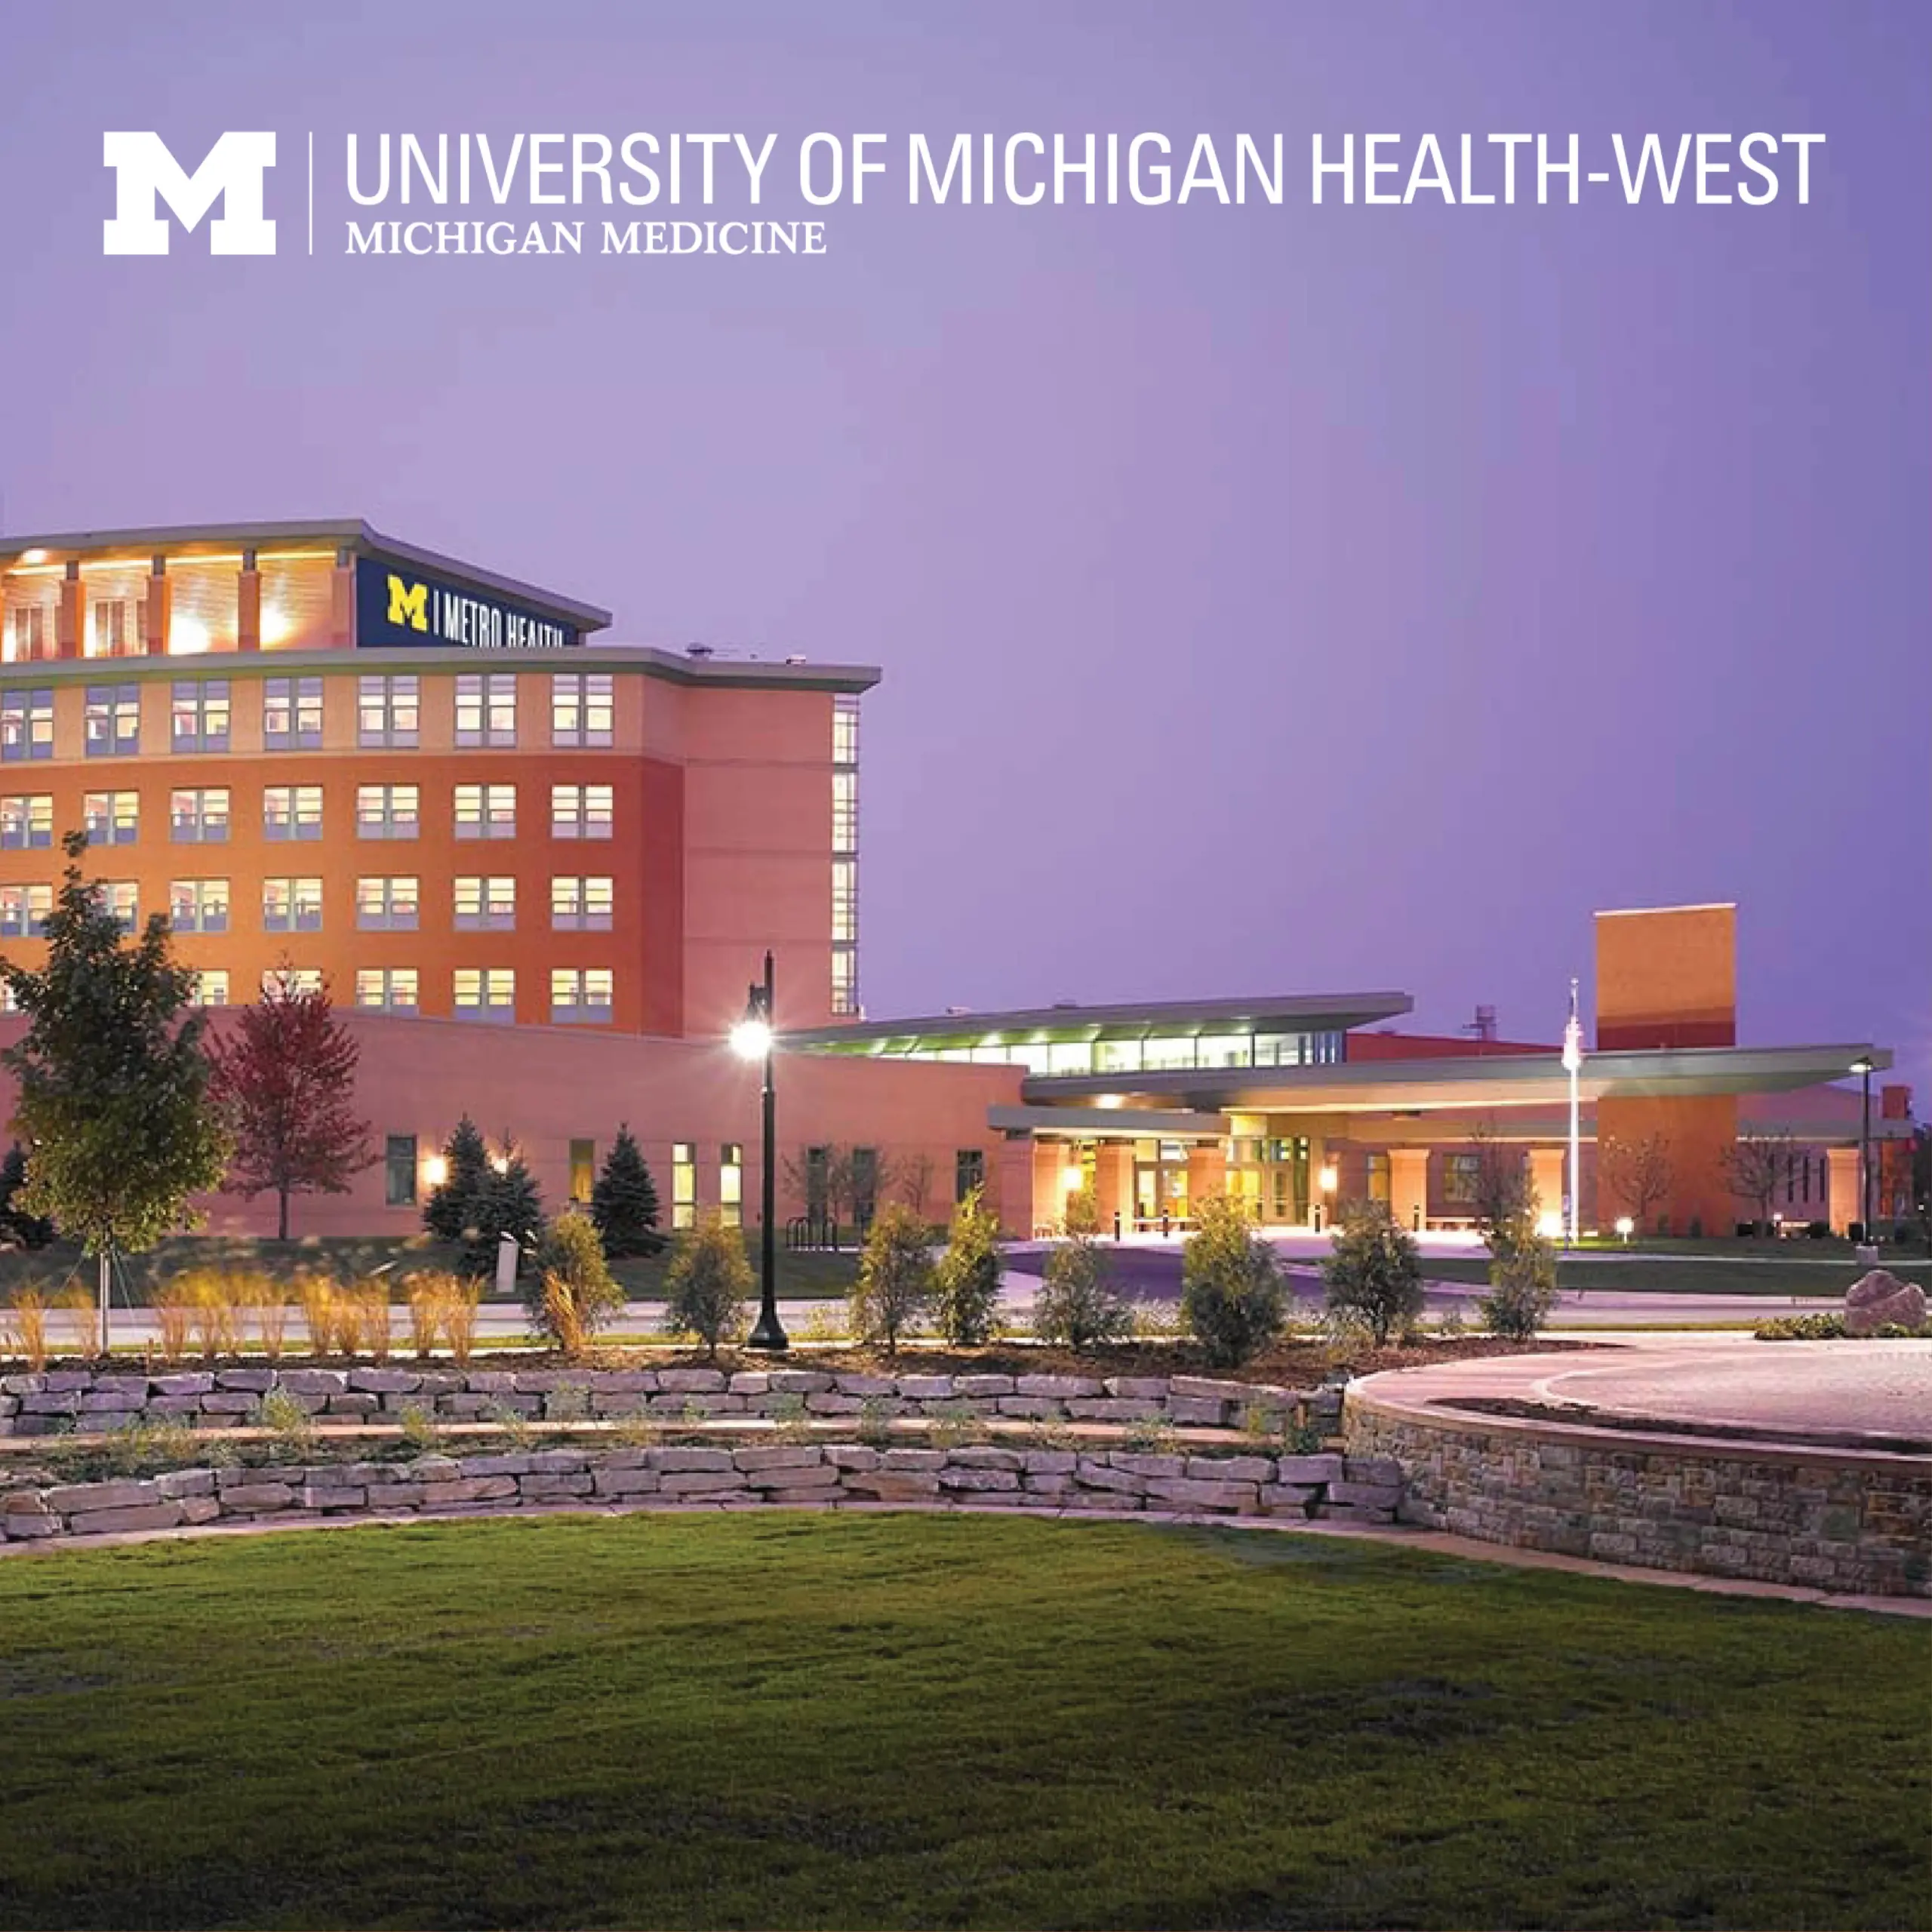 University of Michigan Health-West | Innovating for Patients and Providers